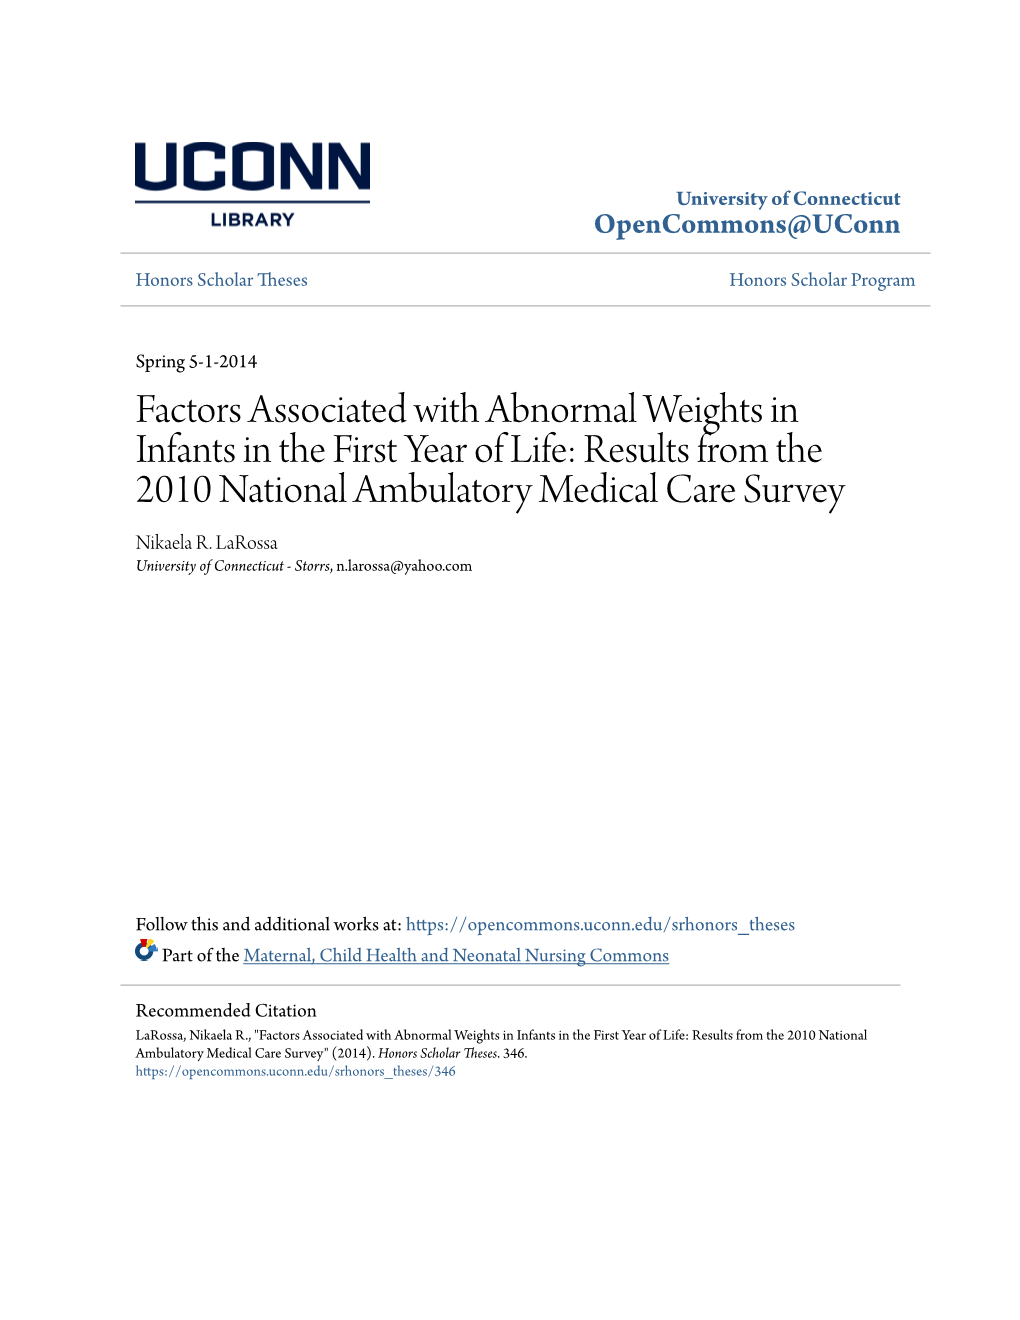 Factors Associated with Abnormal Weights in Infants in the First Year of Life: Results from the 2010 National Ambulatory Medical Care Survey Nikaela R